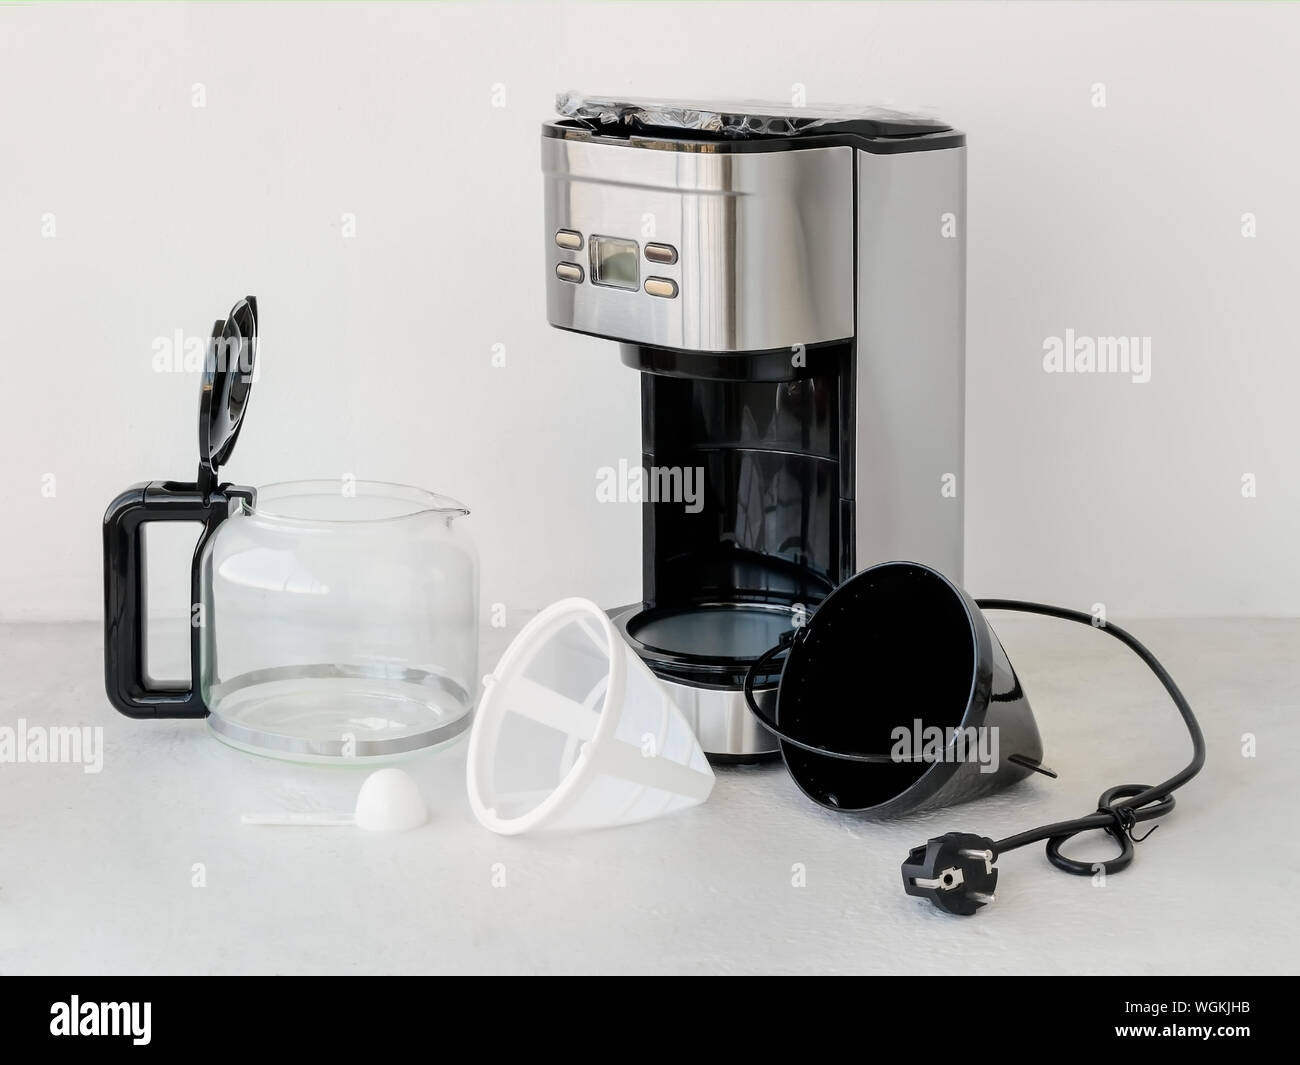 Drip-type coffee maker comprises: coffee machine, glass jug, basket mesh filter, removable filter holder, measuring spoon. Home electrical appliances. Stock Photo